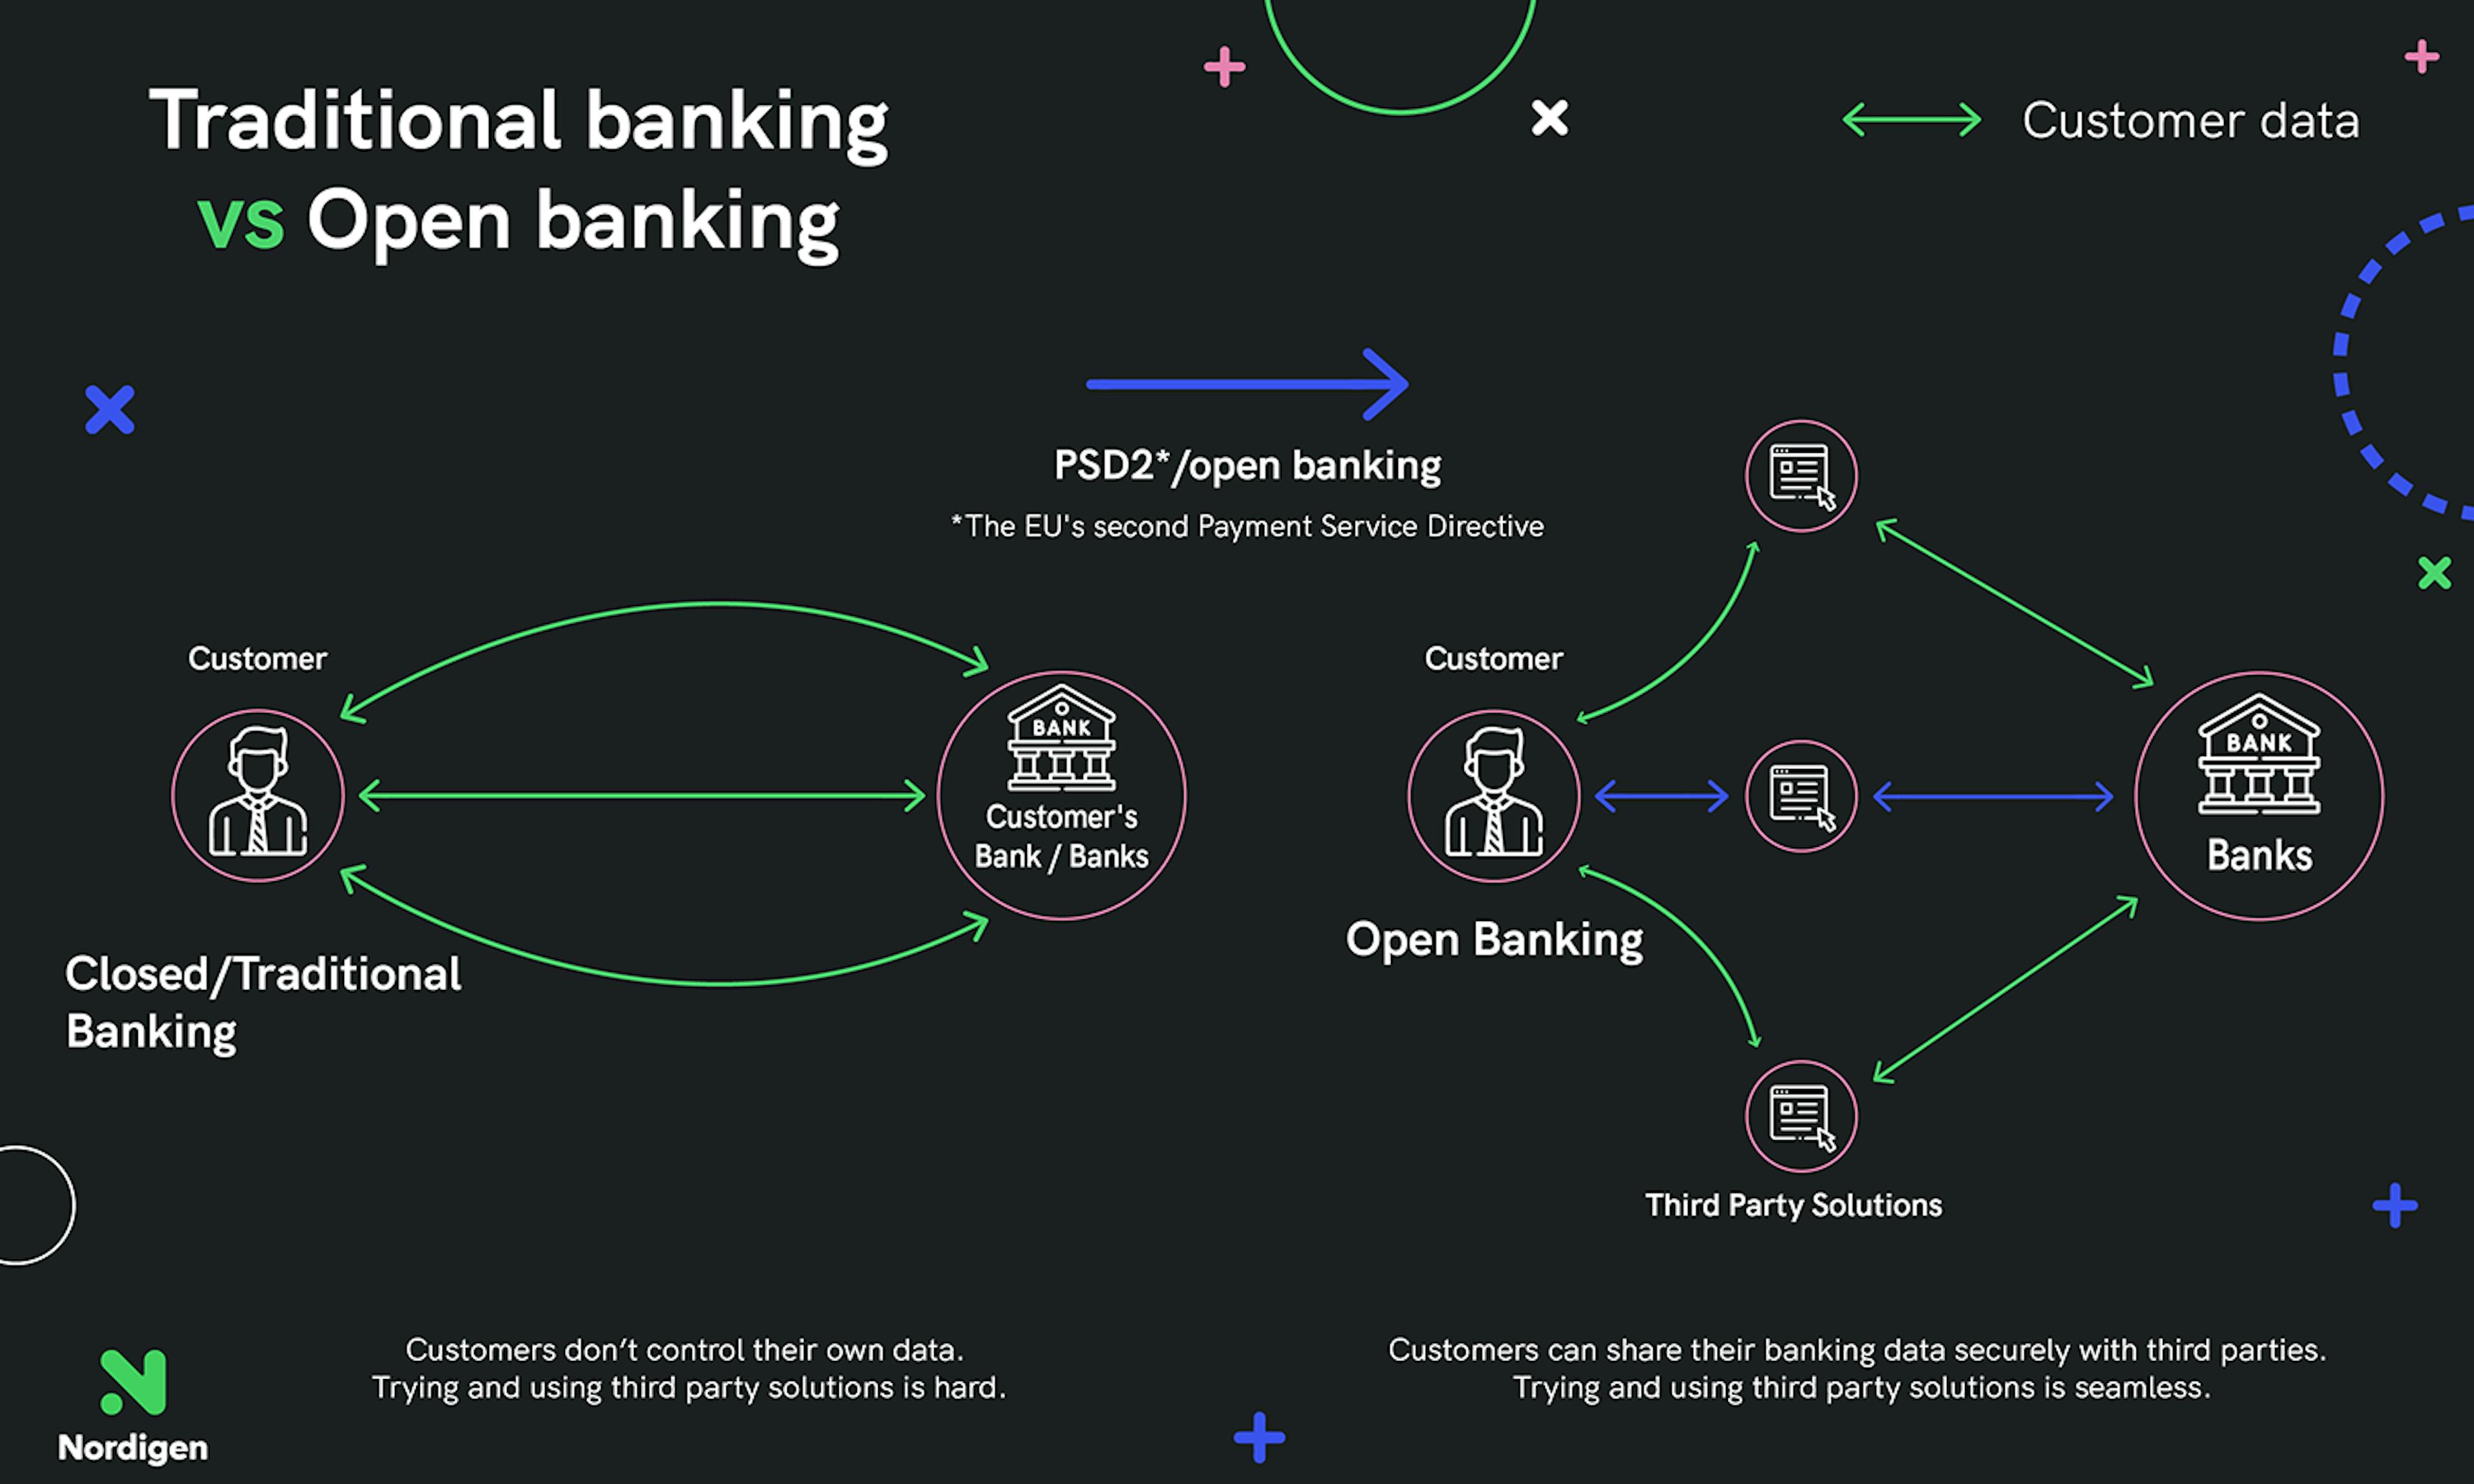 Source: “Traditional banks need to embrace open banking. Here's why” @Nordigen